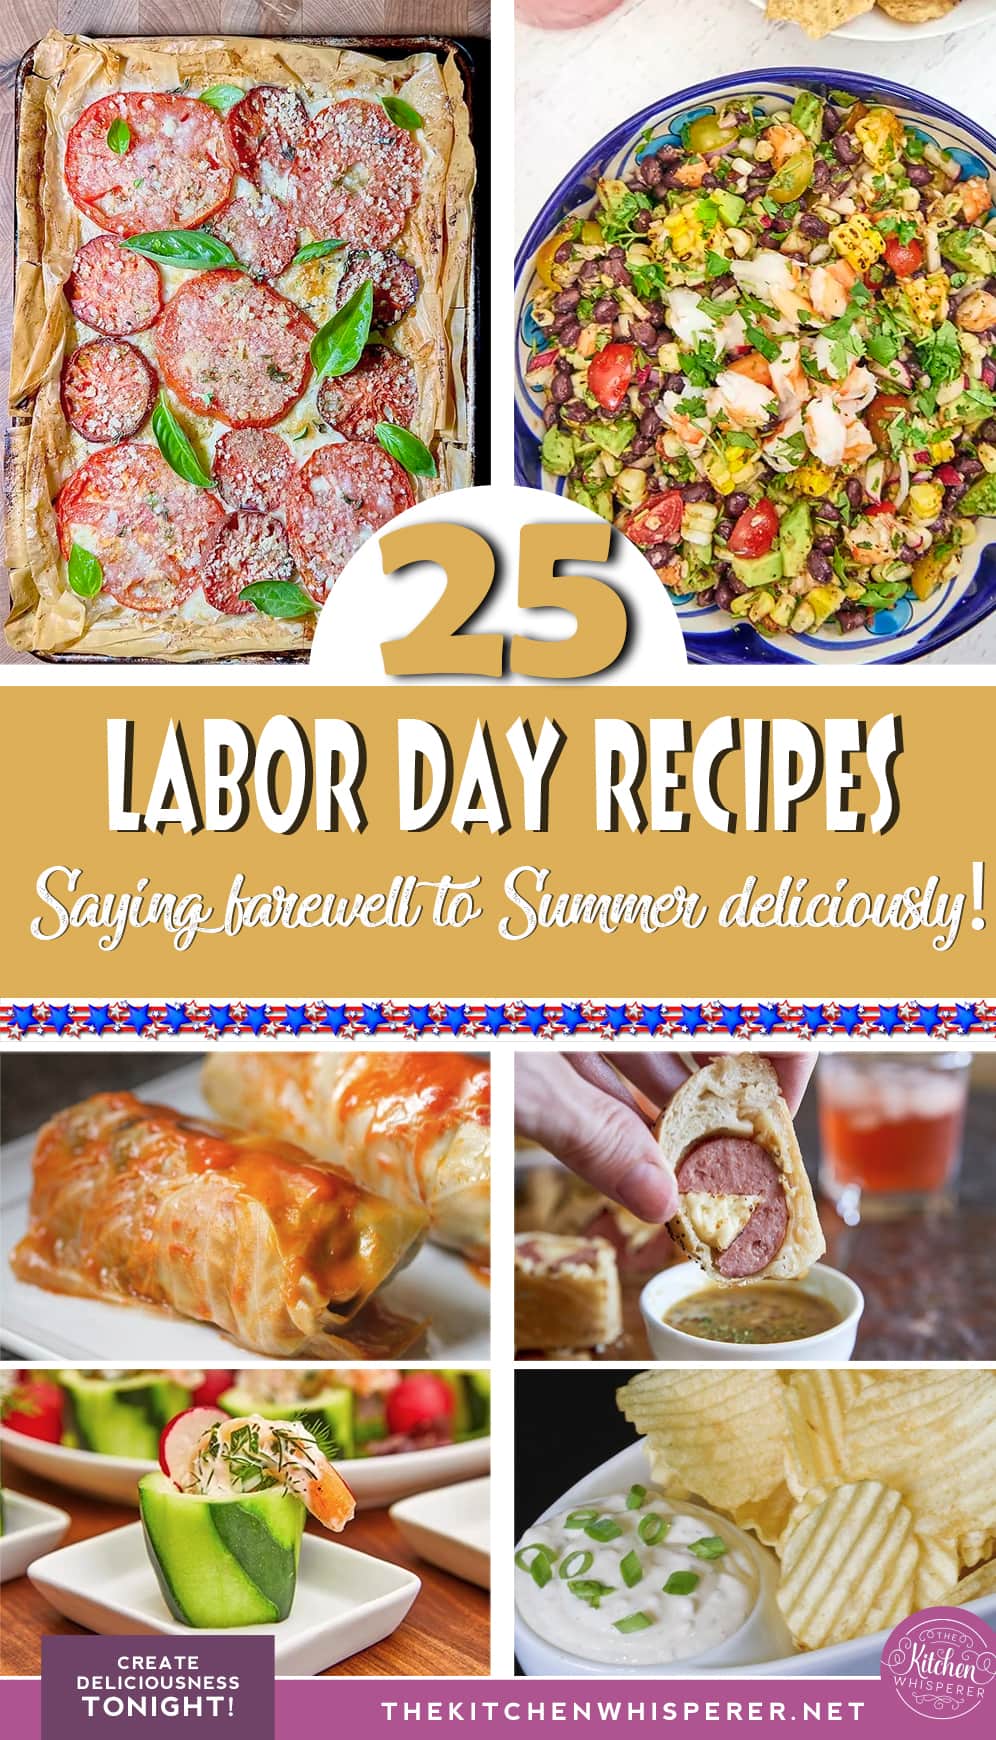 A collection of summer-inspired recipes with a hint of autumn eats to celebrate Labor day and say farewell to summer deliciously. Getting in those last bits of summertime bites while welcoming all of those warm autumn comfort foods. 25 Recipes to Celebrate Labor Day, bbq, cookout, bbq sauce, cookout foods, backyard foods, 3-day holiday, dill pickle cheeseball, pulled chicken, pulled pork, best stuffed cabbages, #laborday